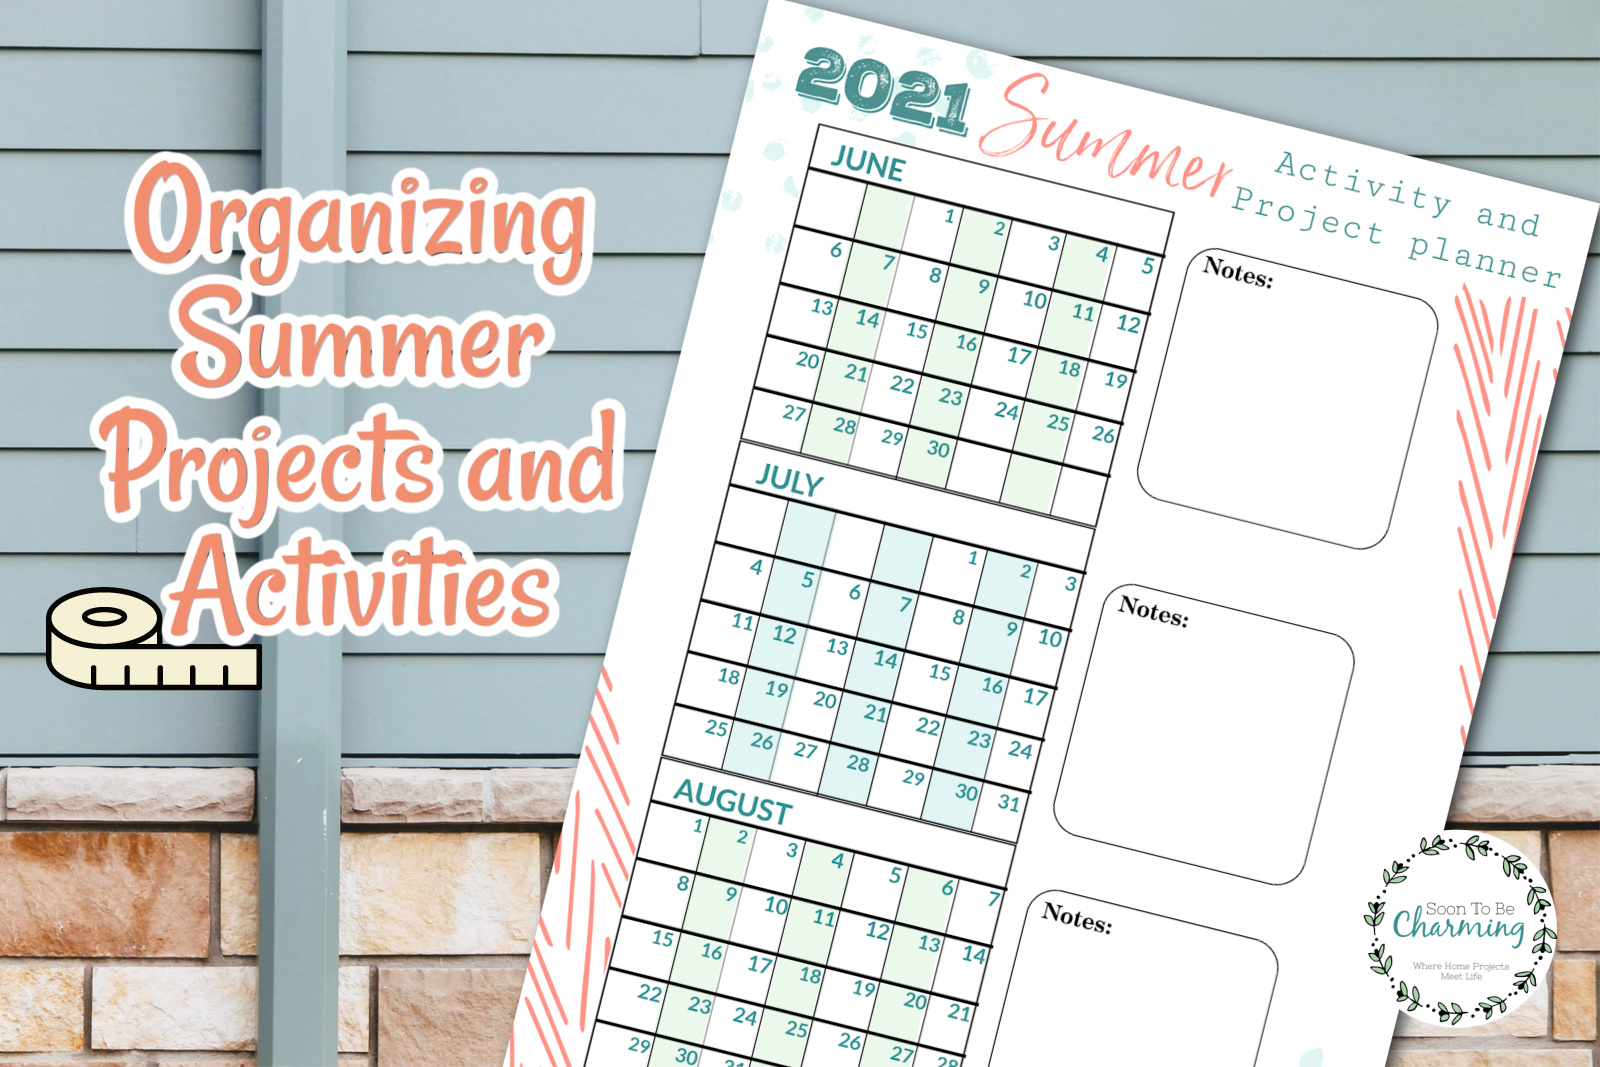 Organizing Summer Projects and Activities 2021